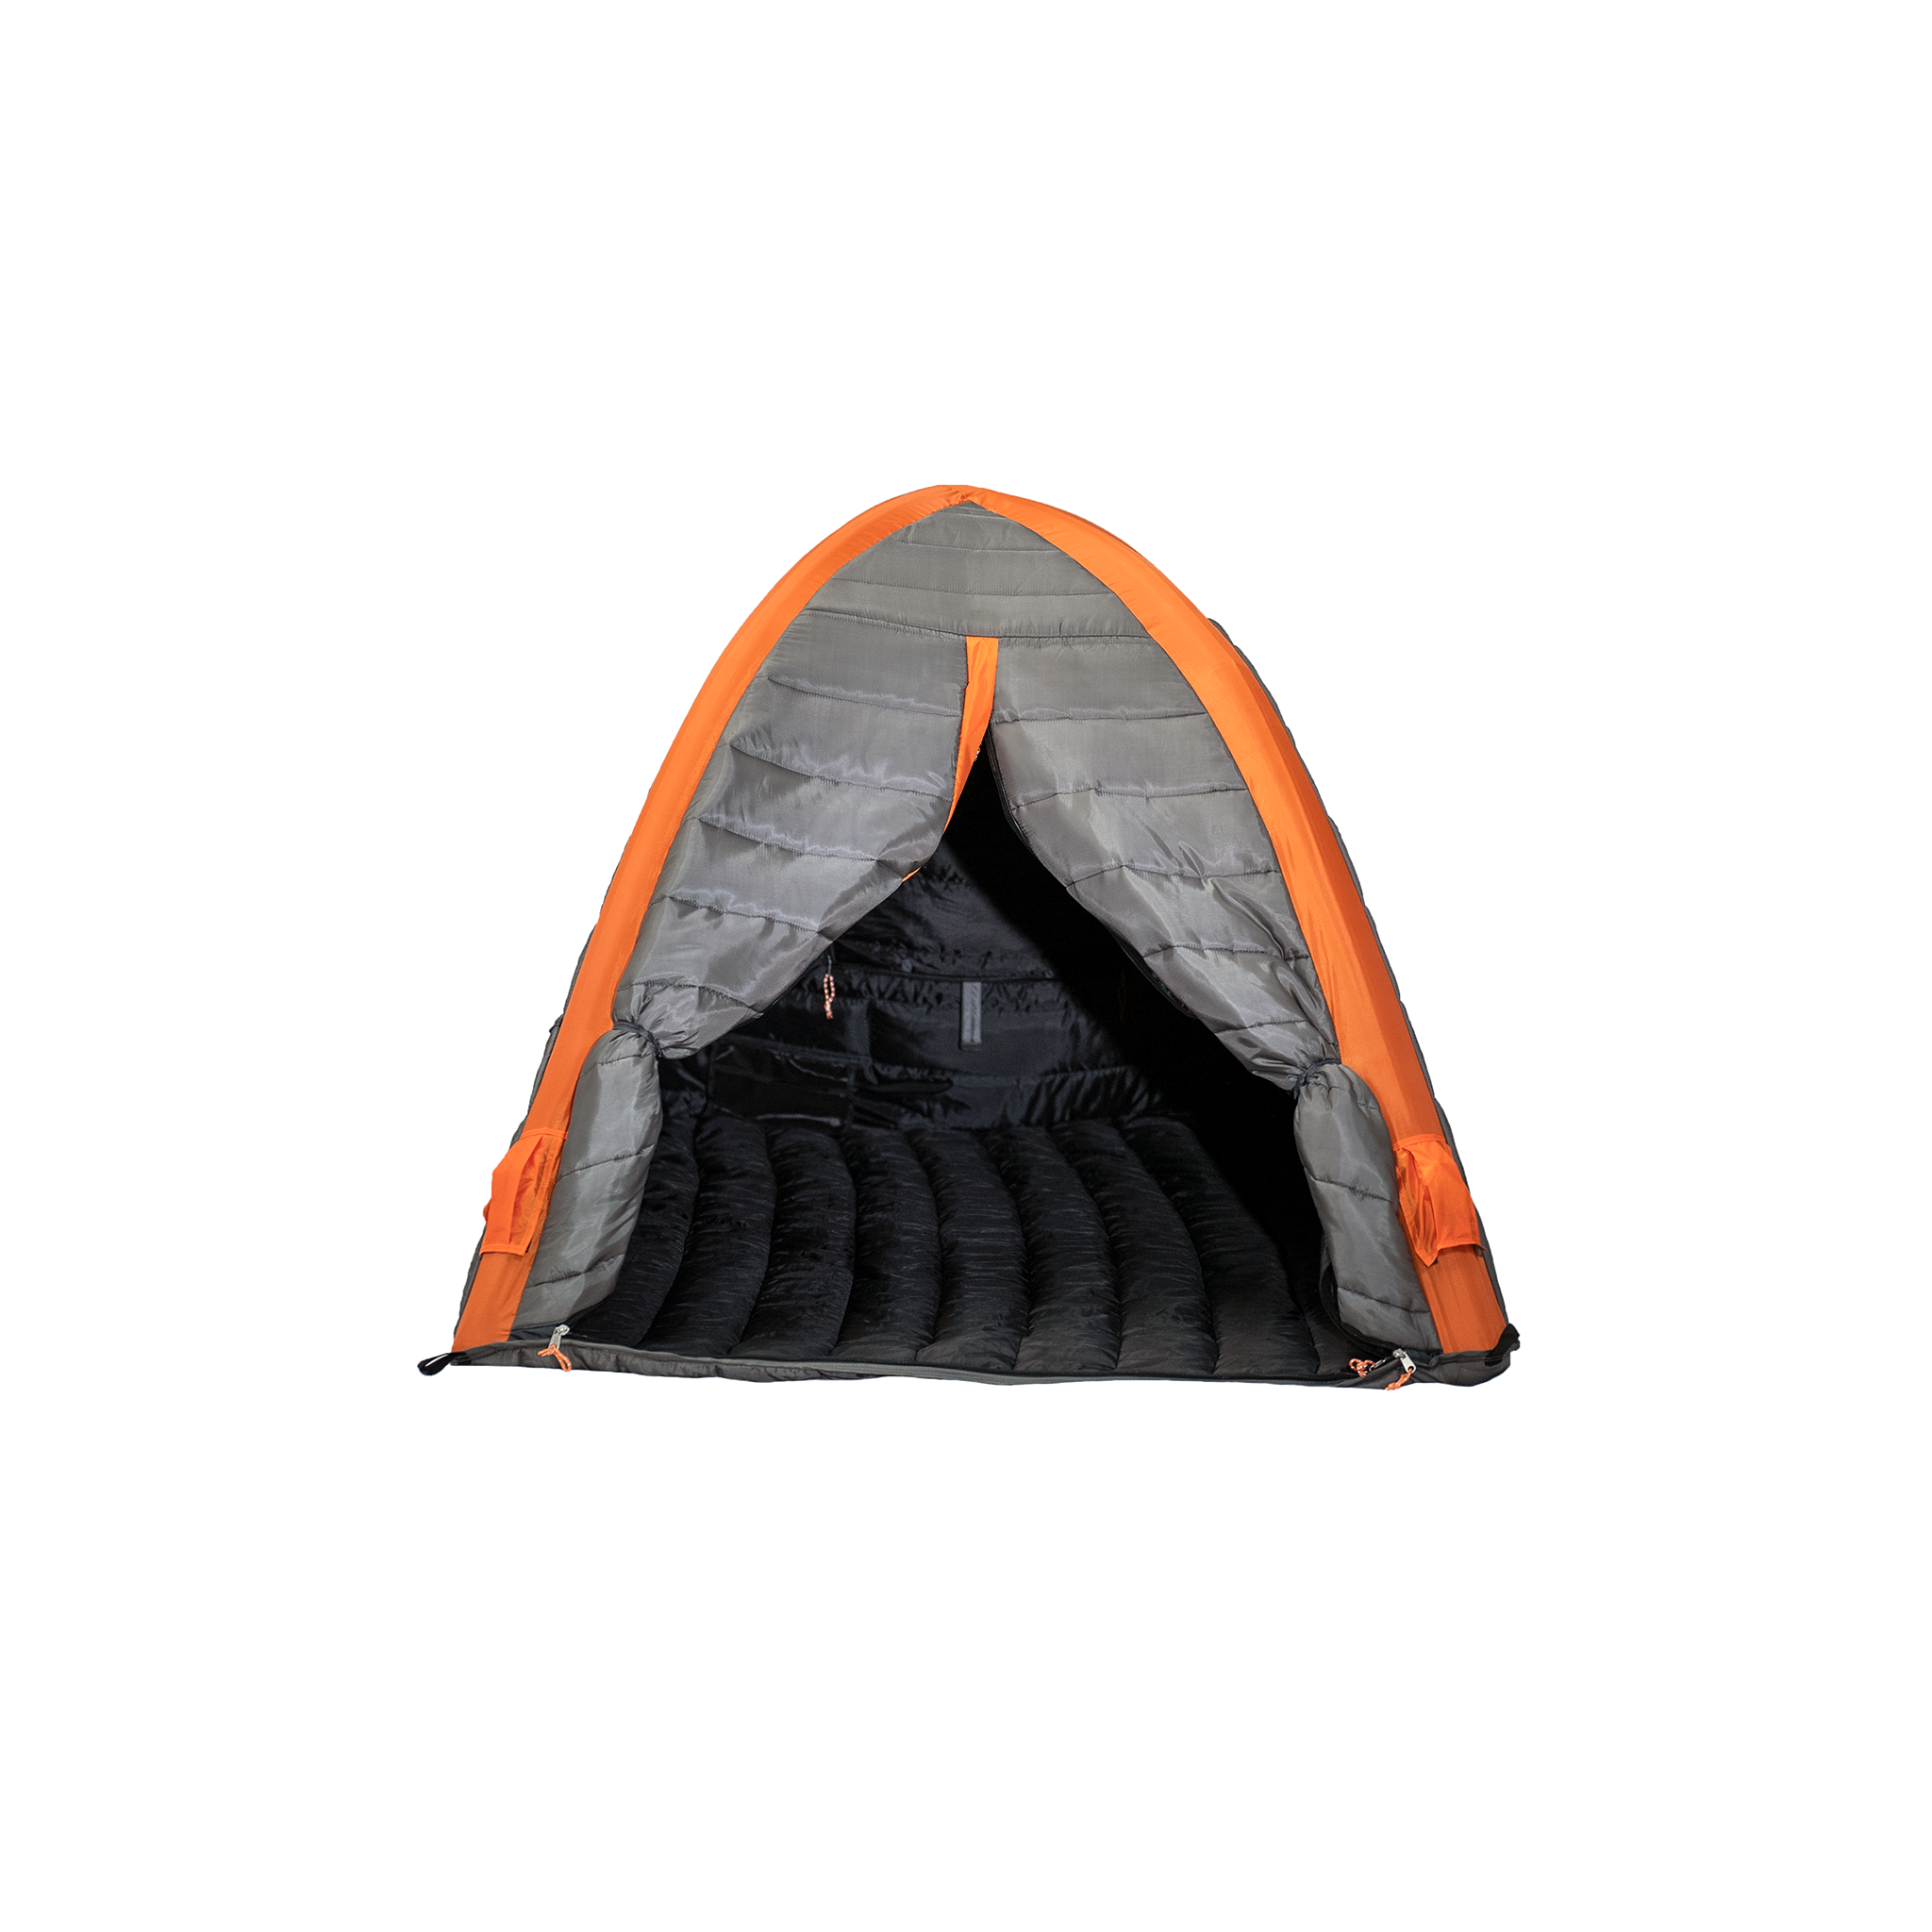  Crua Culla Haul - Rooftop Tent Inner Insulated Lining -  Temperature, Noise & Light Insulated Tent : Sports & Outdoors